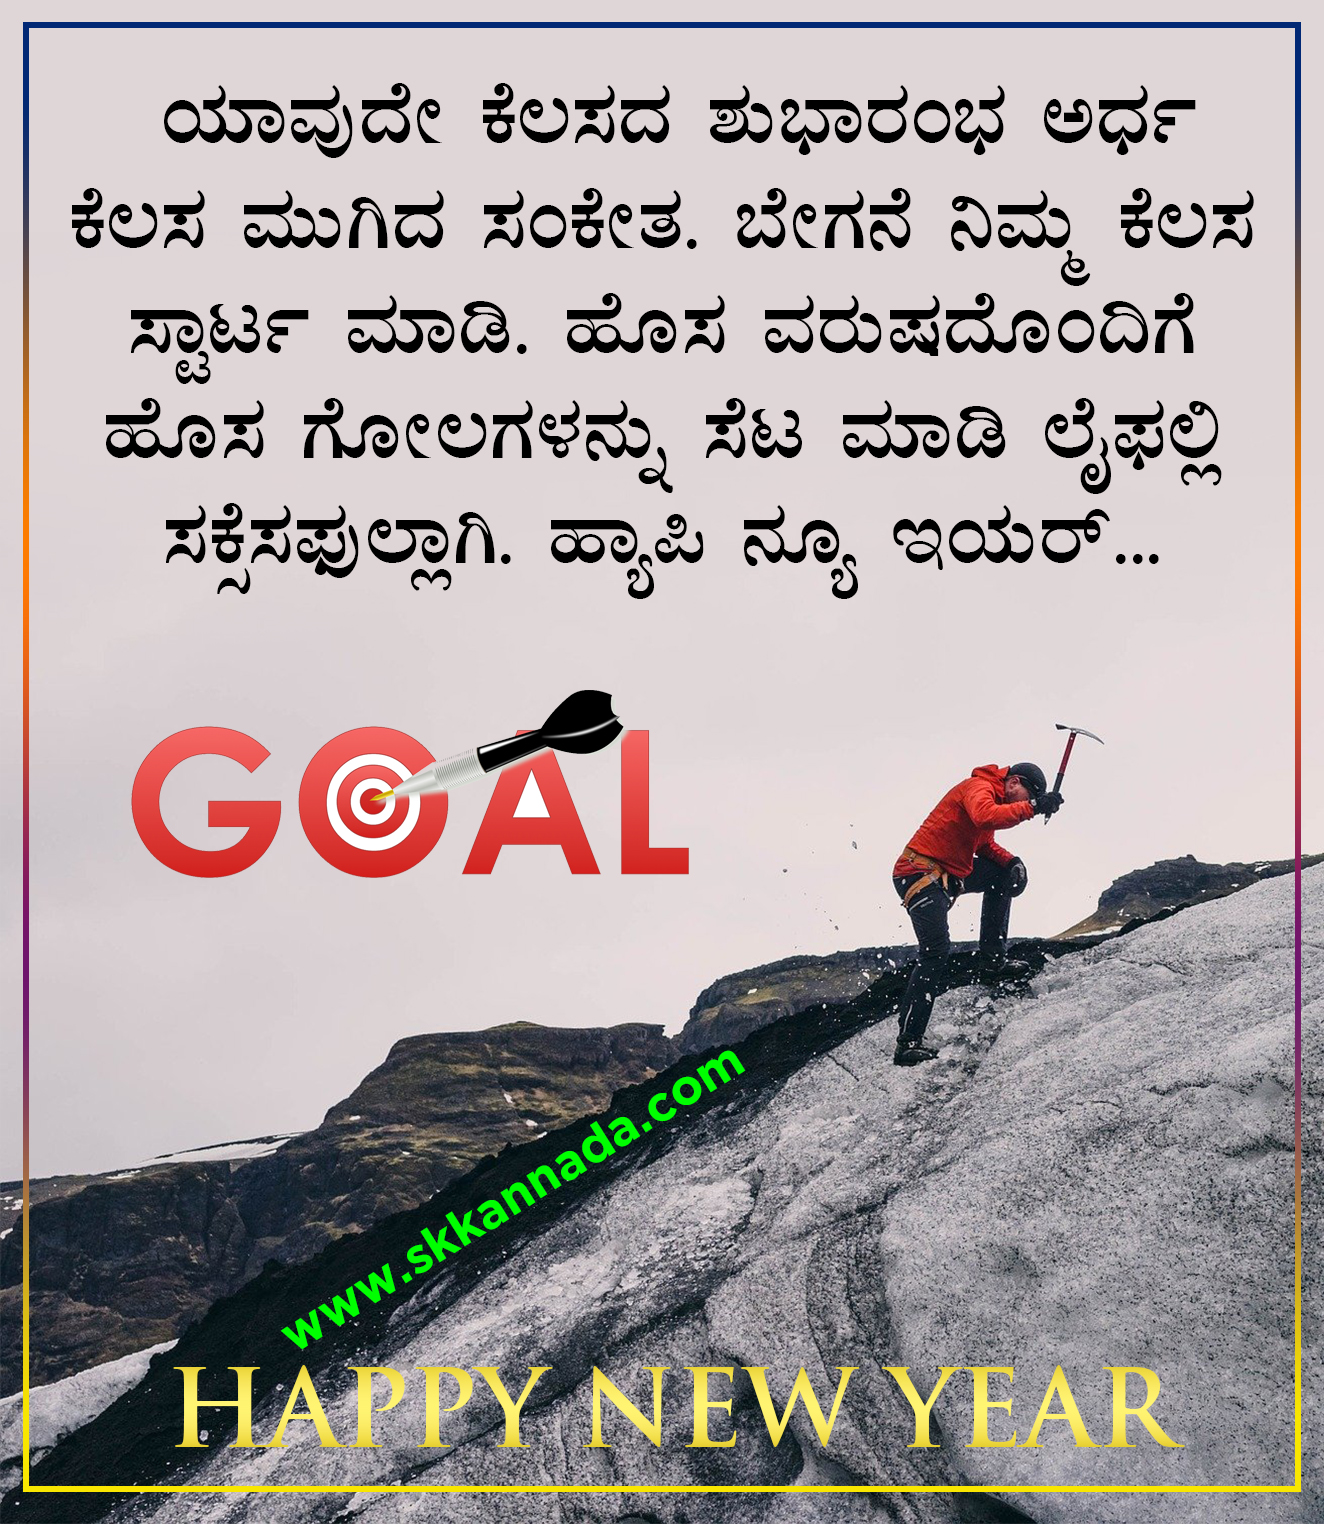 Happy New Year Wishes quotes in Kannada